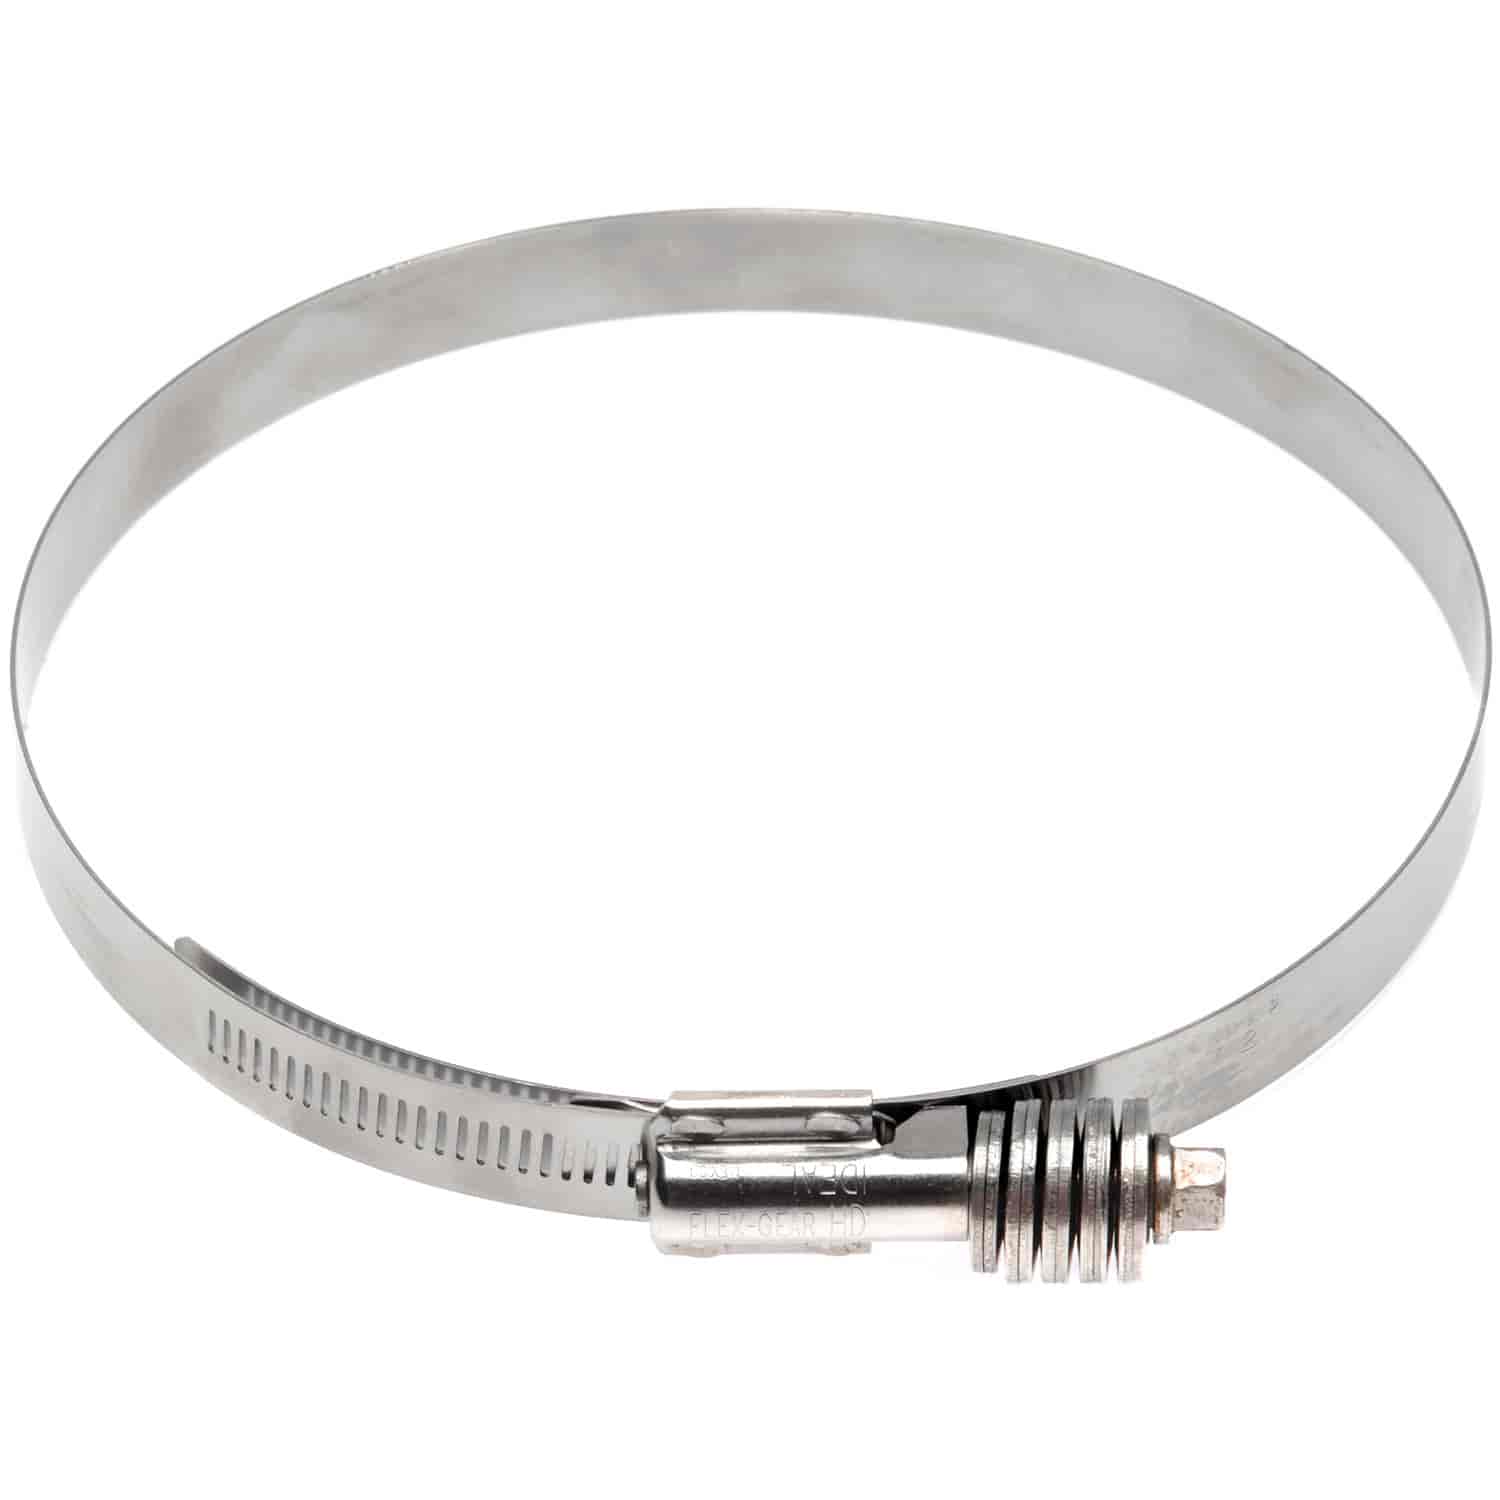 Stainless Steel Marine Hose Clamp [5.625 in. to